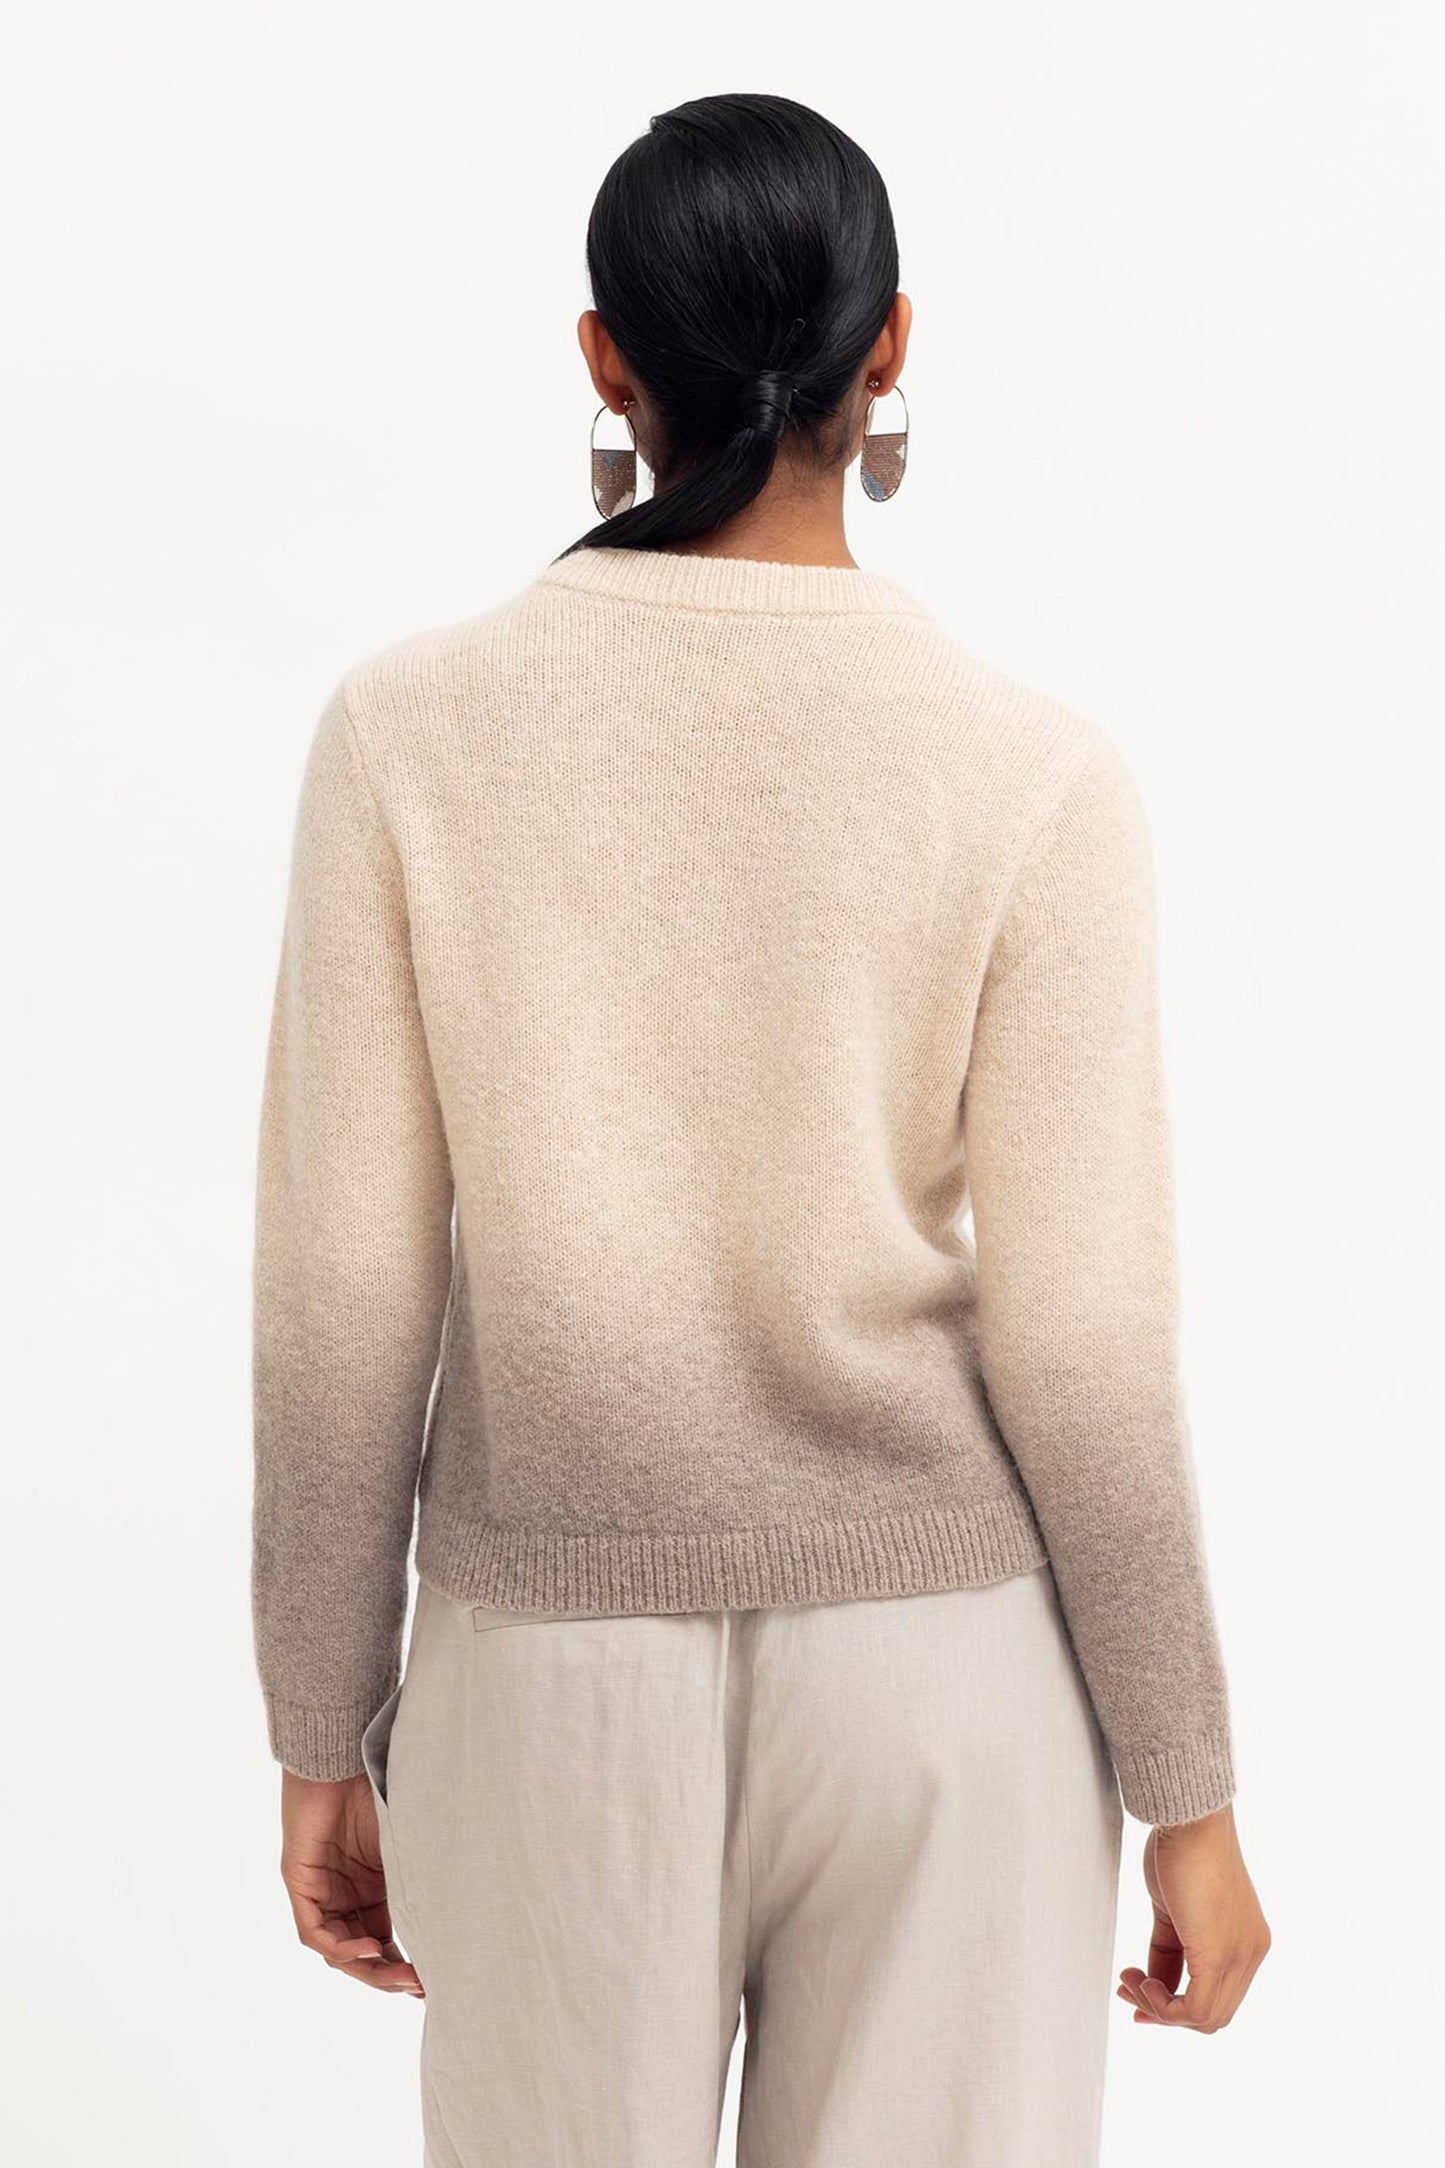 Ombre Crew Neck Dip Tied Knit Sweater Model Model Back | ECRU BROWN OMBRE